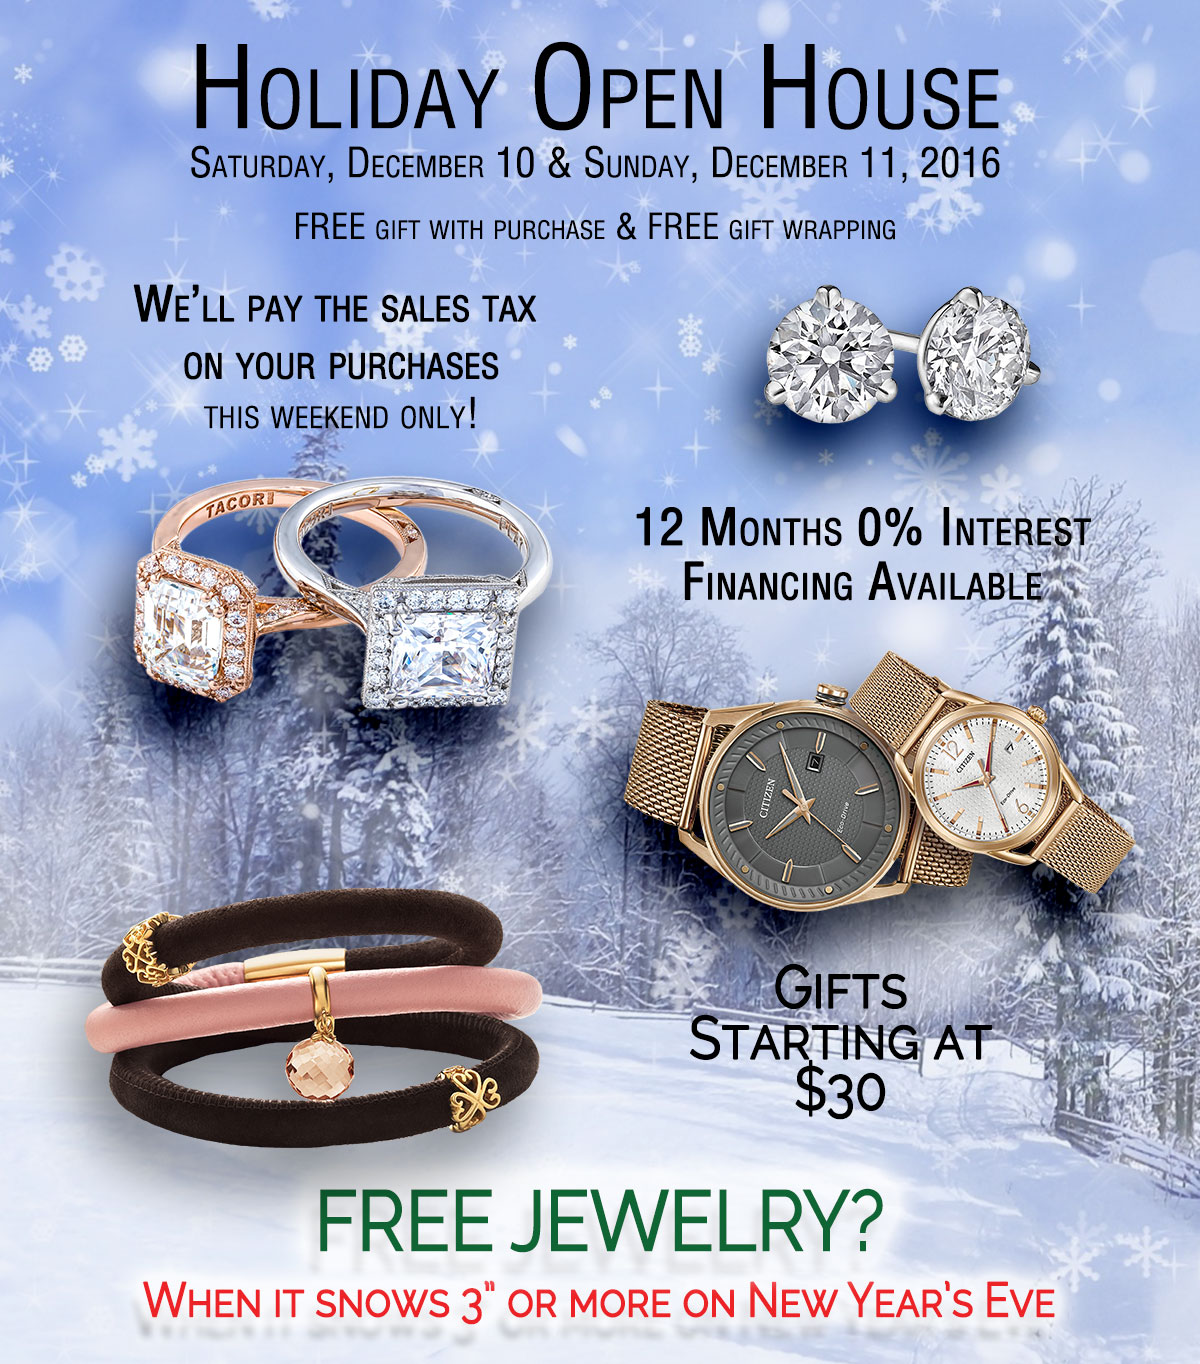 Holiday Open House 2016